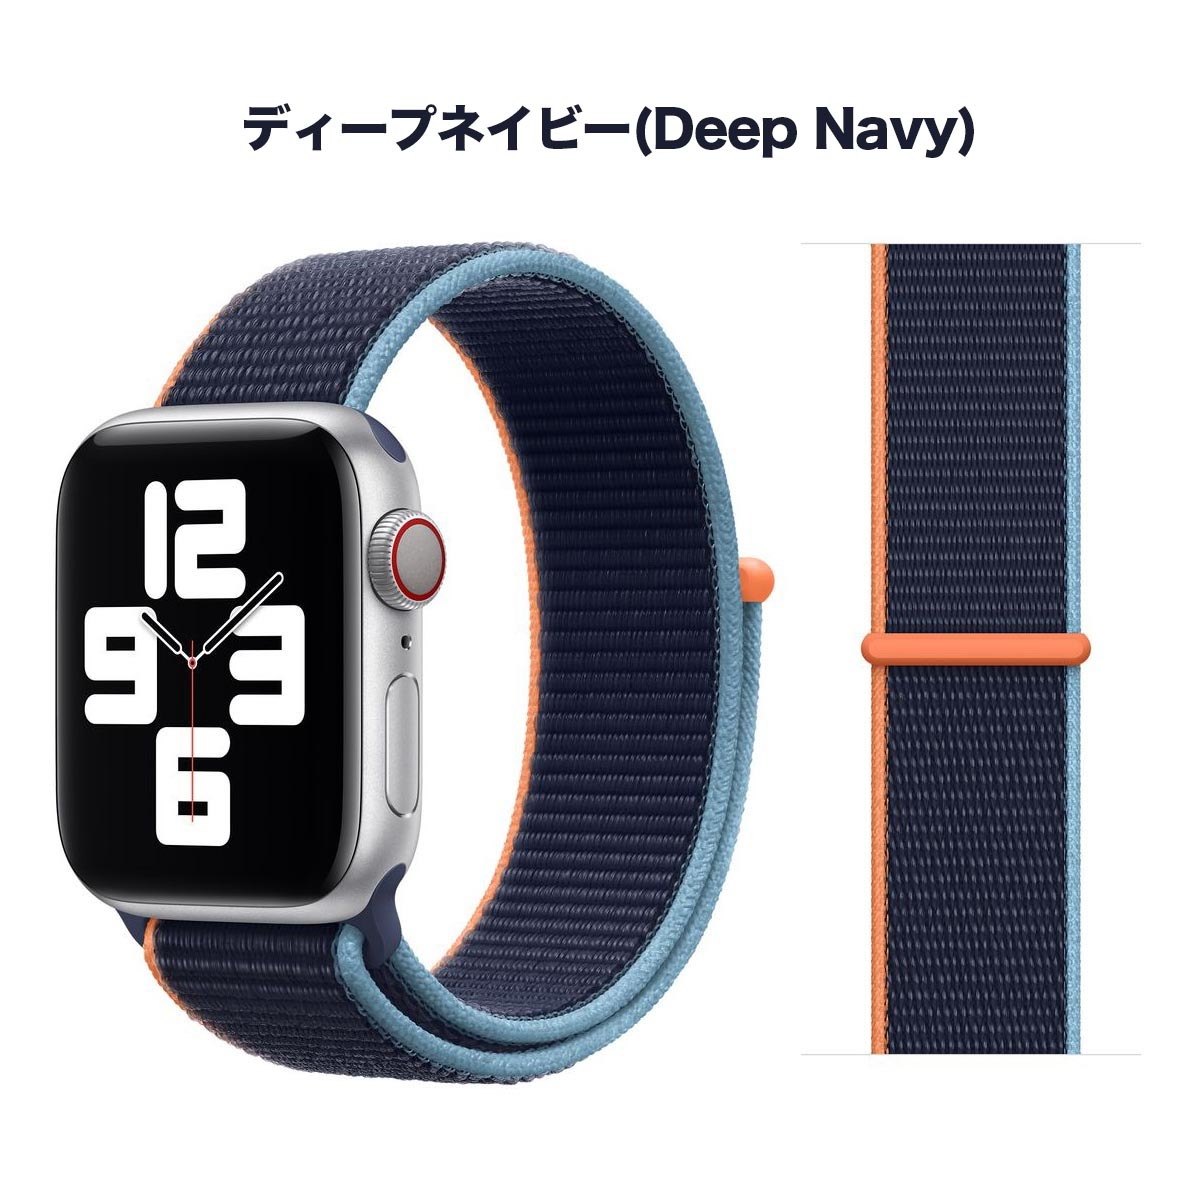 [ postage included ] new color 38/40/41mm Apple watch deep navy sport loop nylon band strap AppleWatch